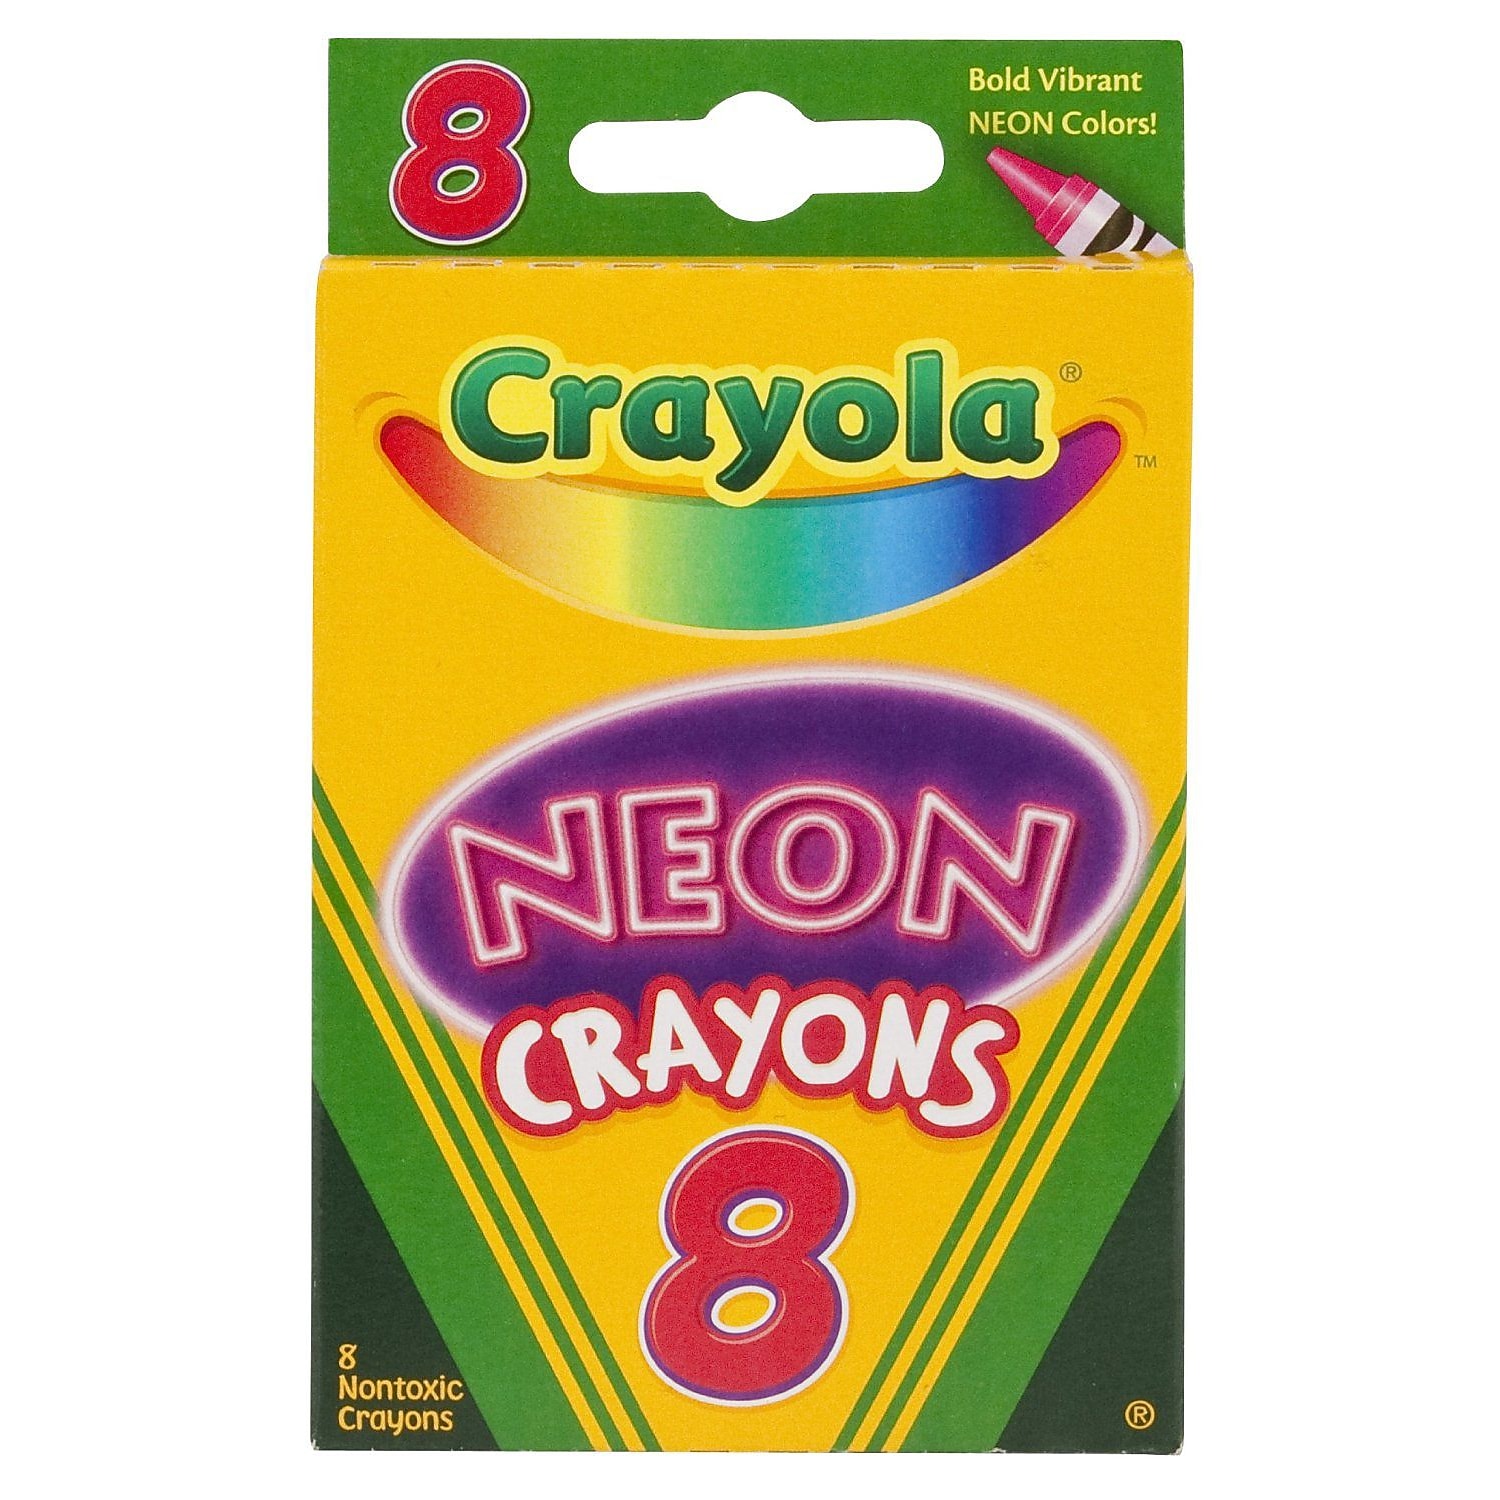 Crayola Non-Toxic Crayon, Assorted Neon Color, Pack Of 8 - image 1 of 4